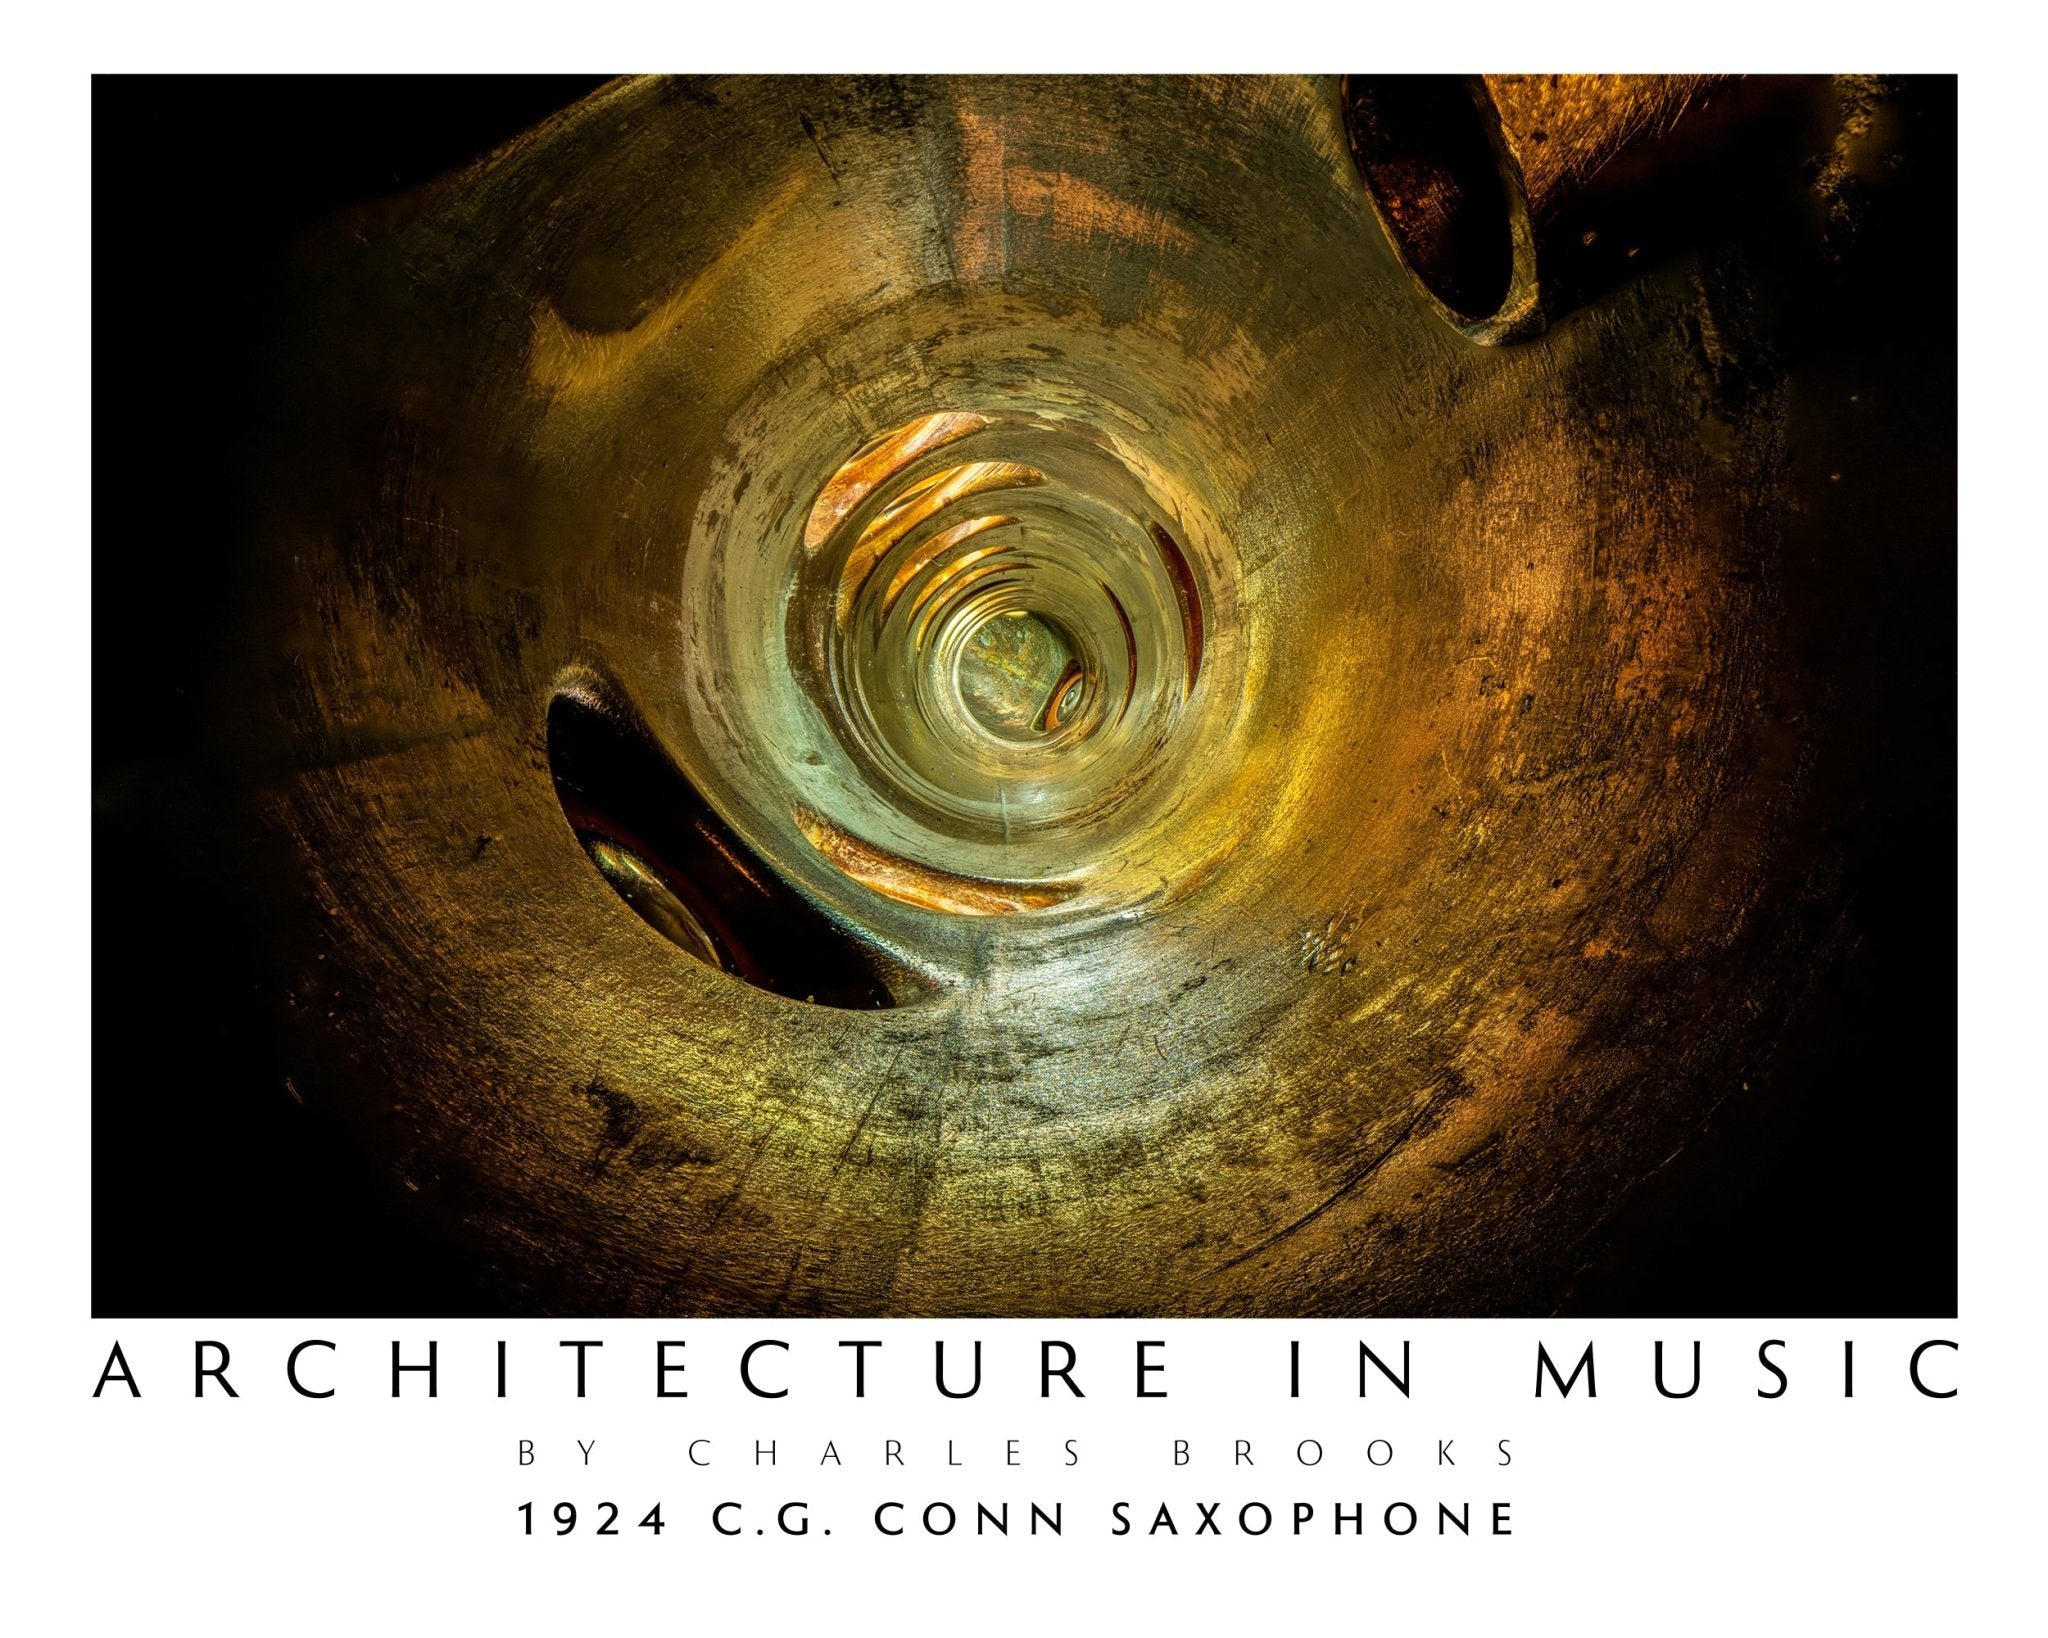 Photo of 1924 CG Conn C-Melody Saxophone. High Quality Poster. - Giclée Poster Print - Architecture In Music